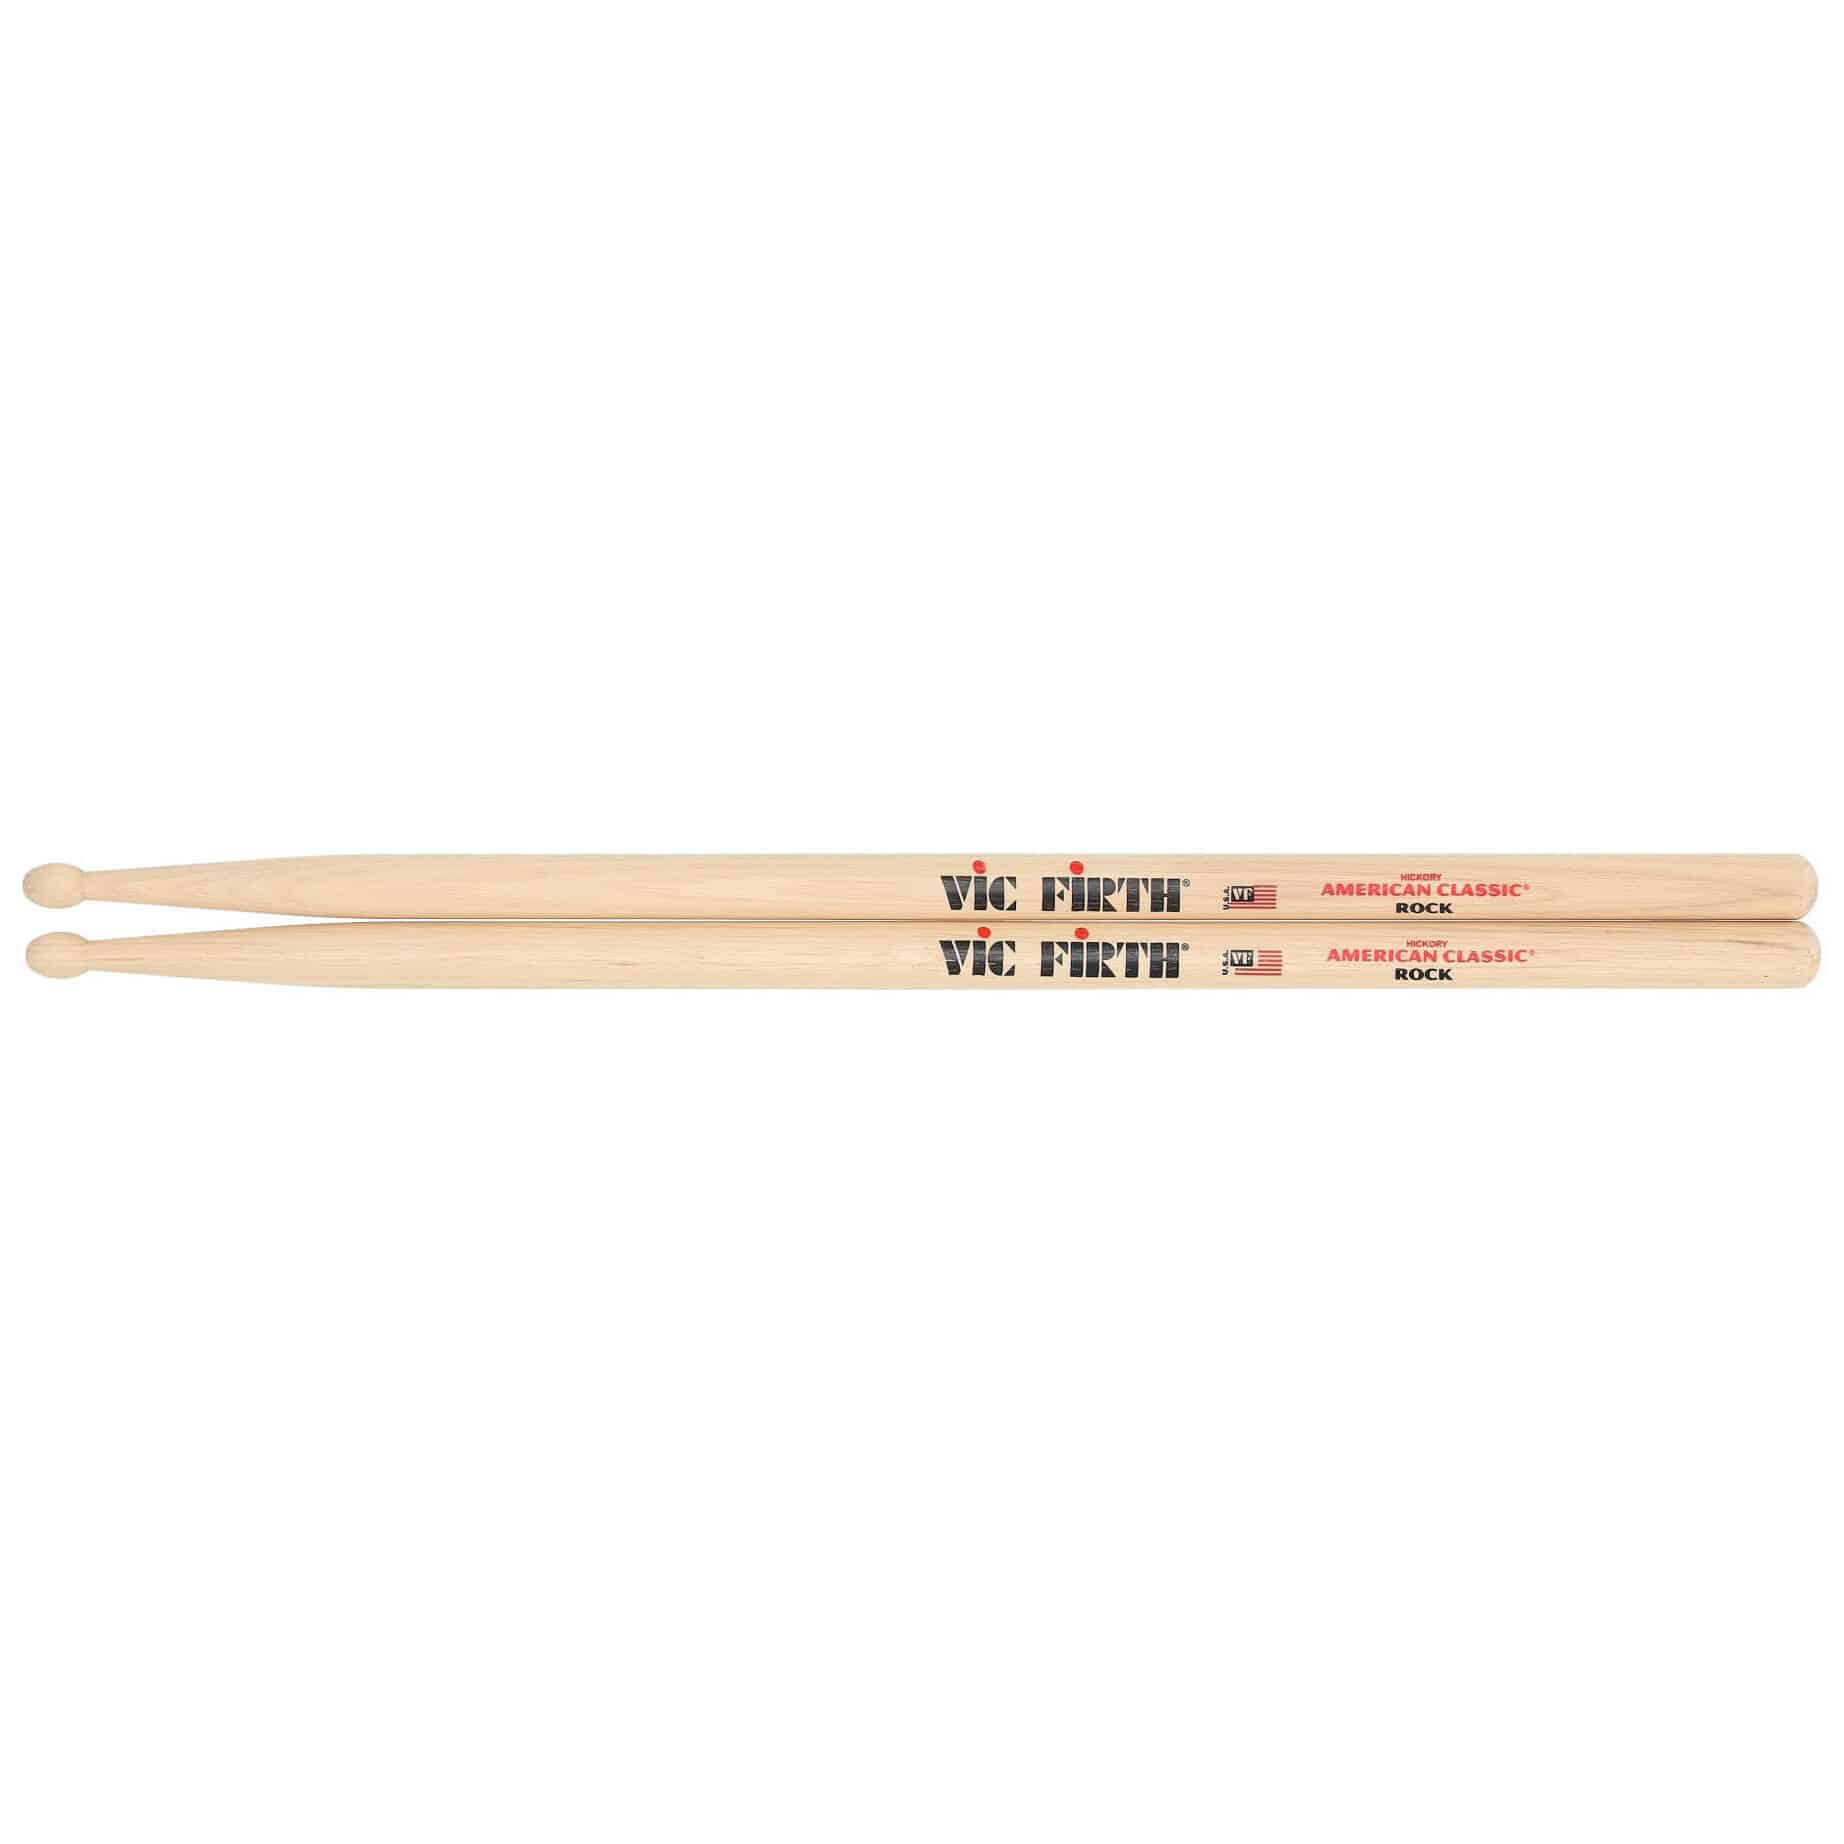 Vic Firth Rock - American Classic - Hickory - Wood Tip 1